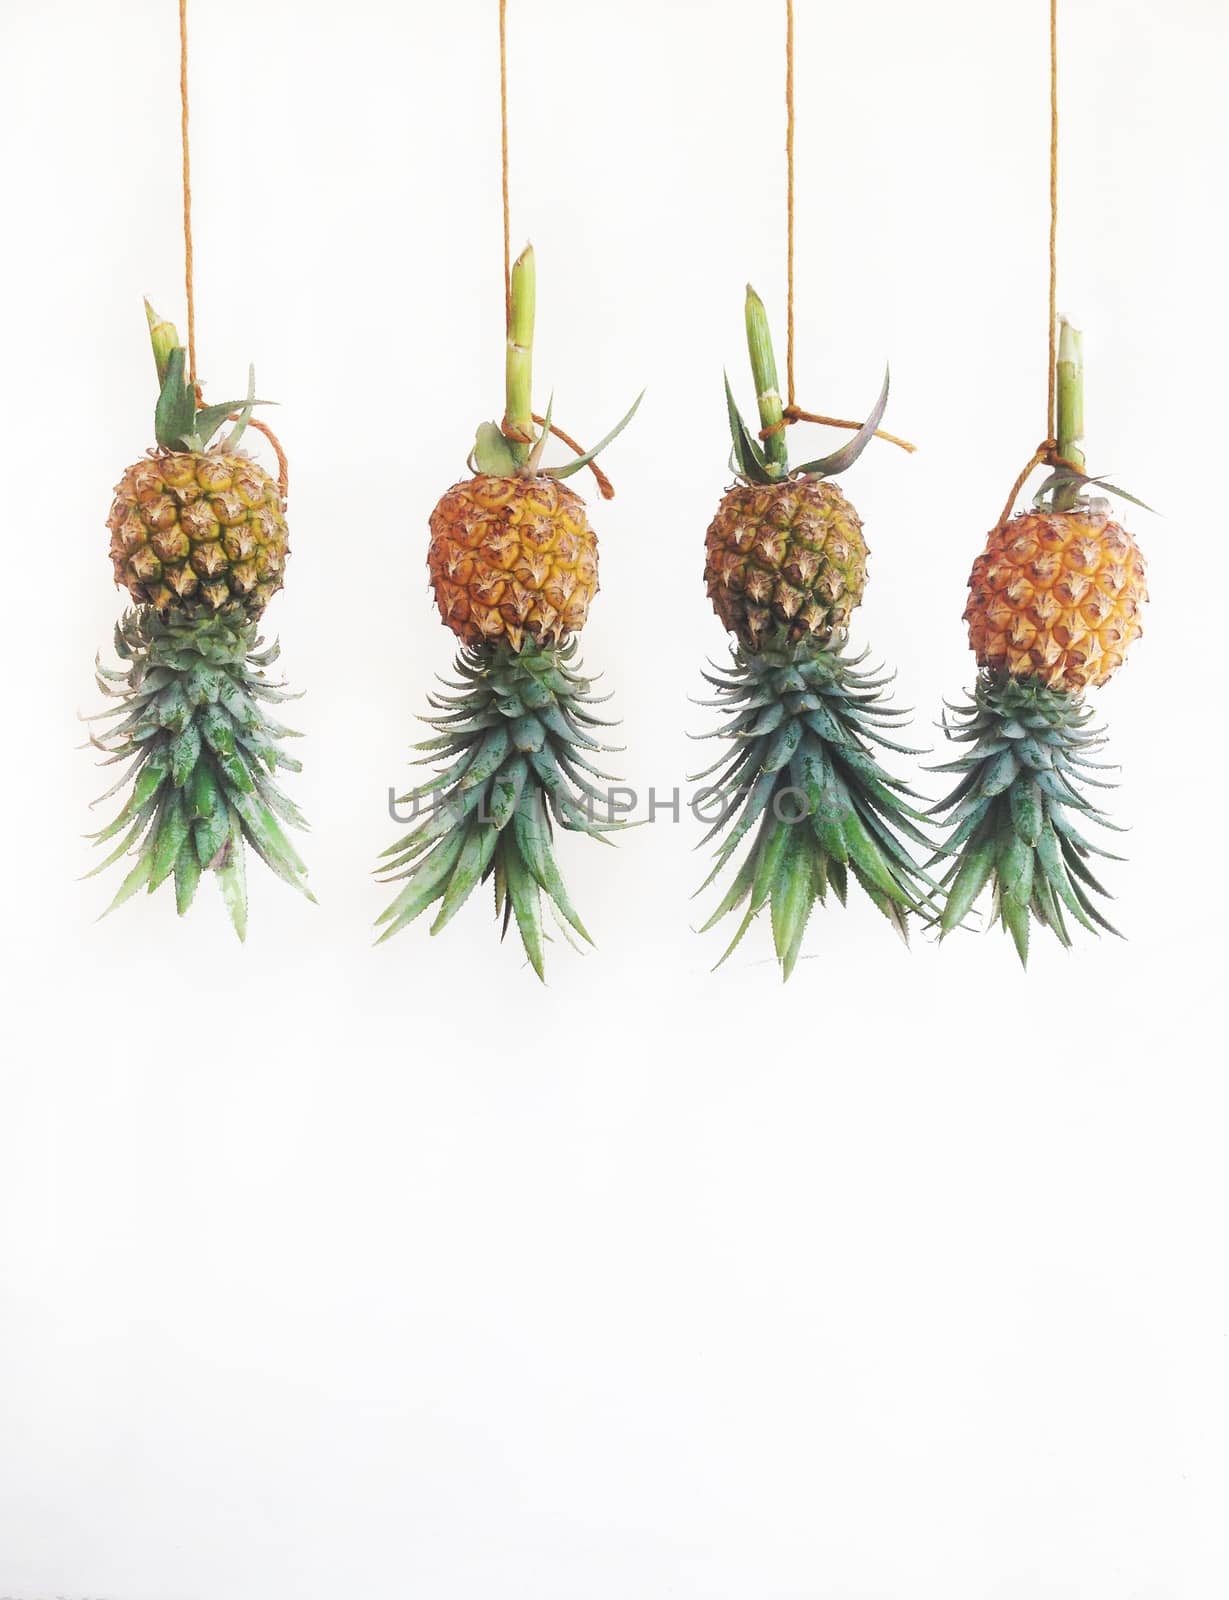 Pineapples hanging, white back ground